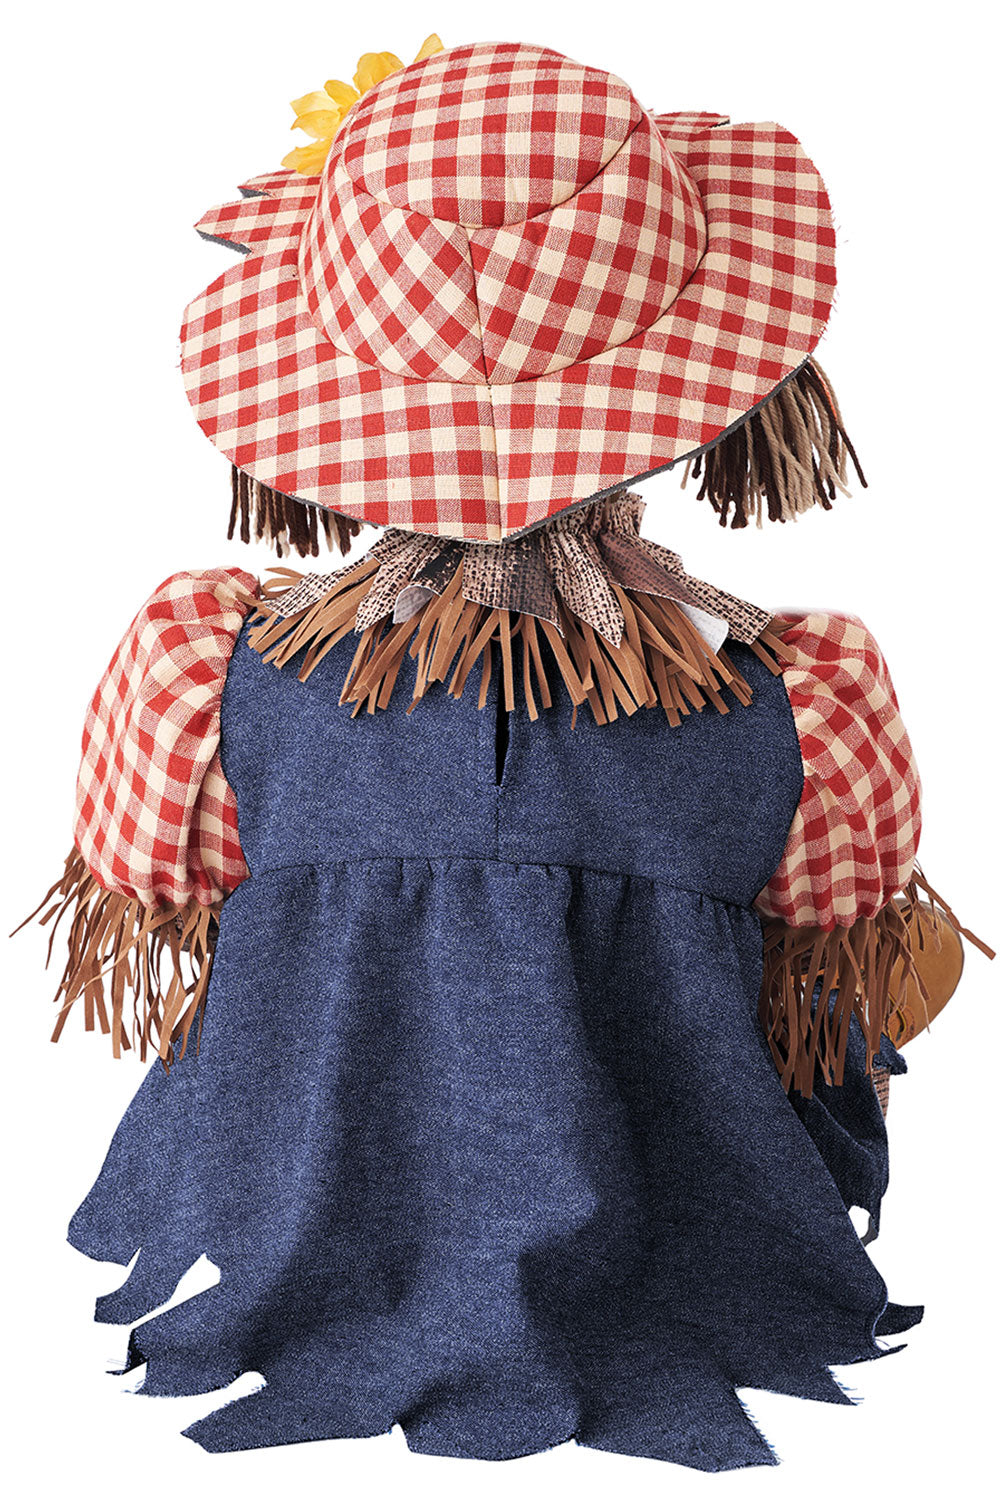 Lil' Cute Scarecrow Infant Costume